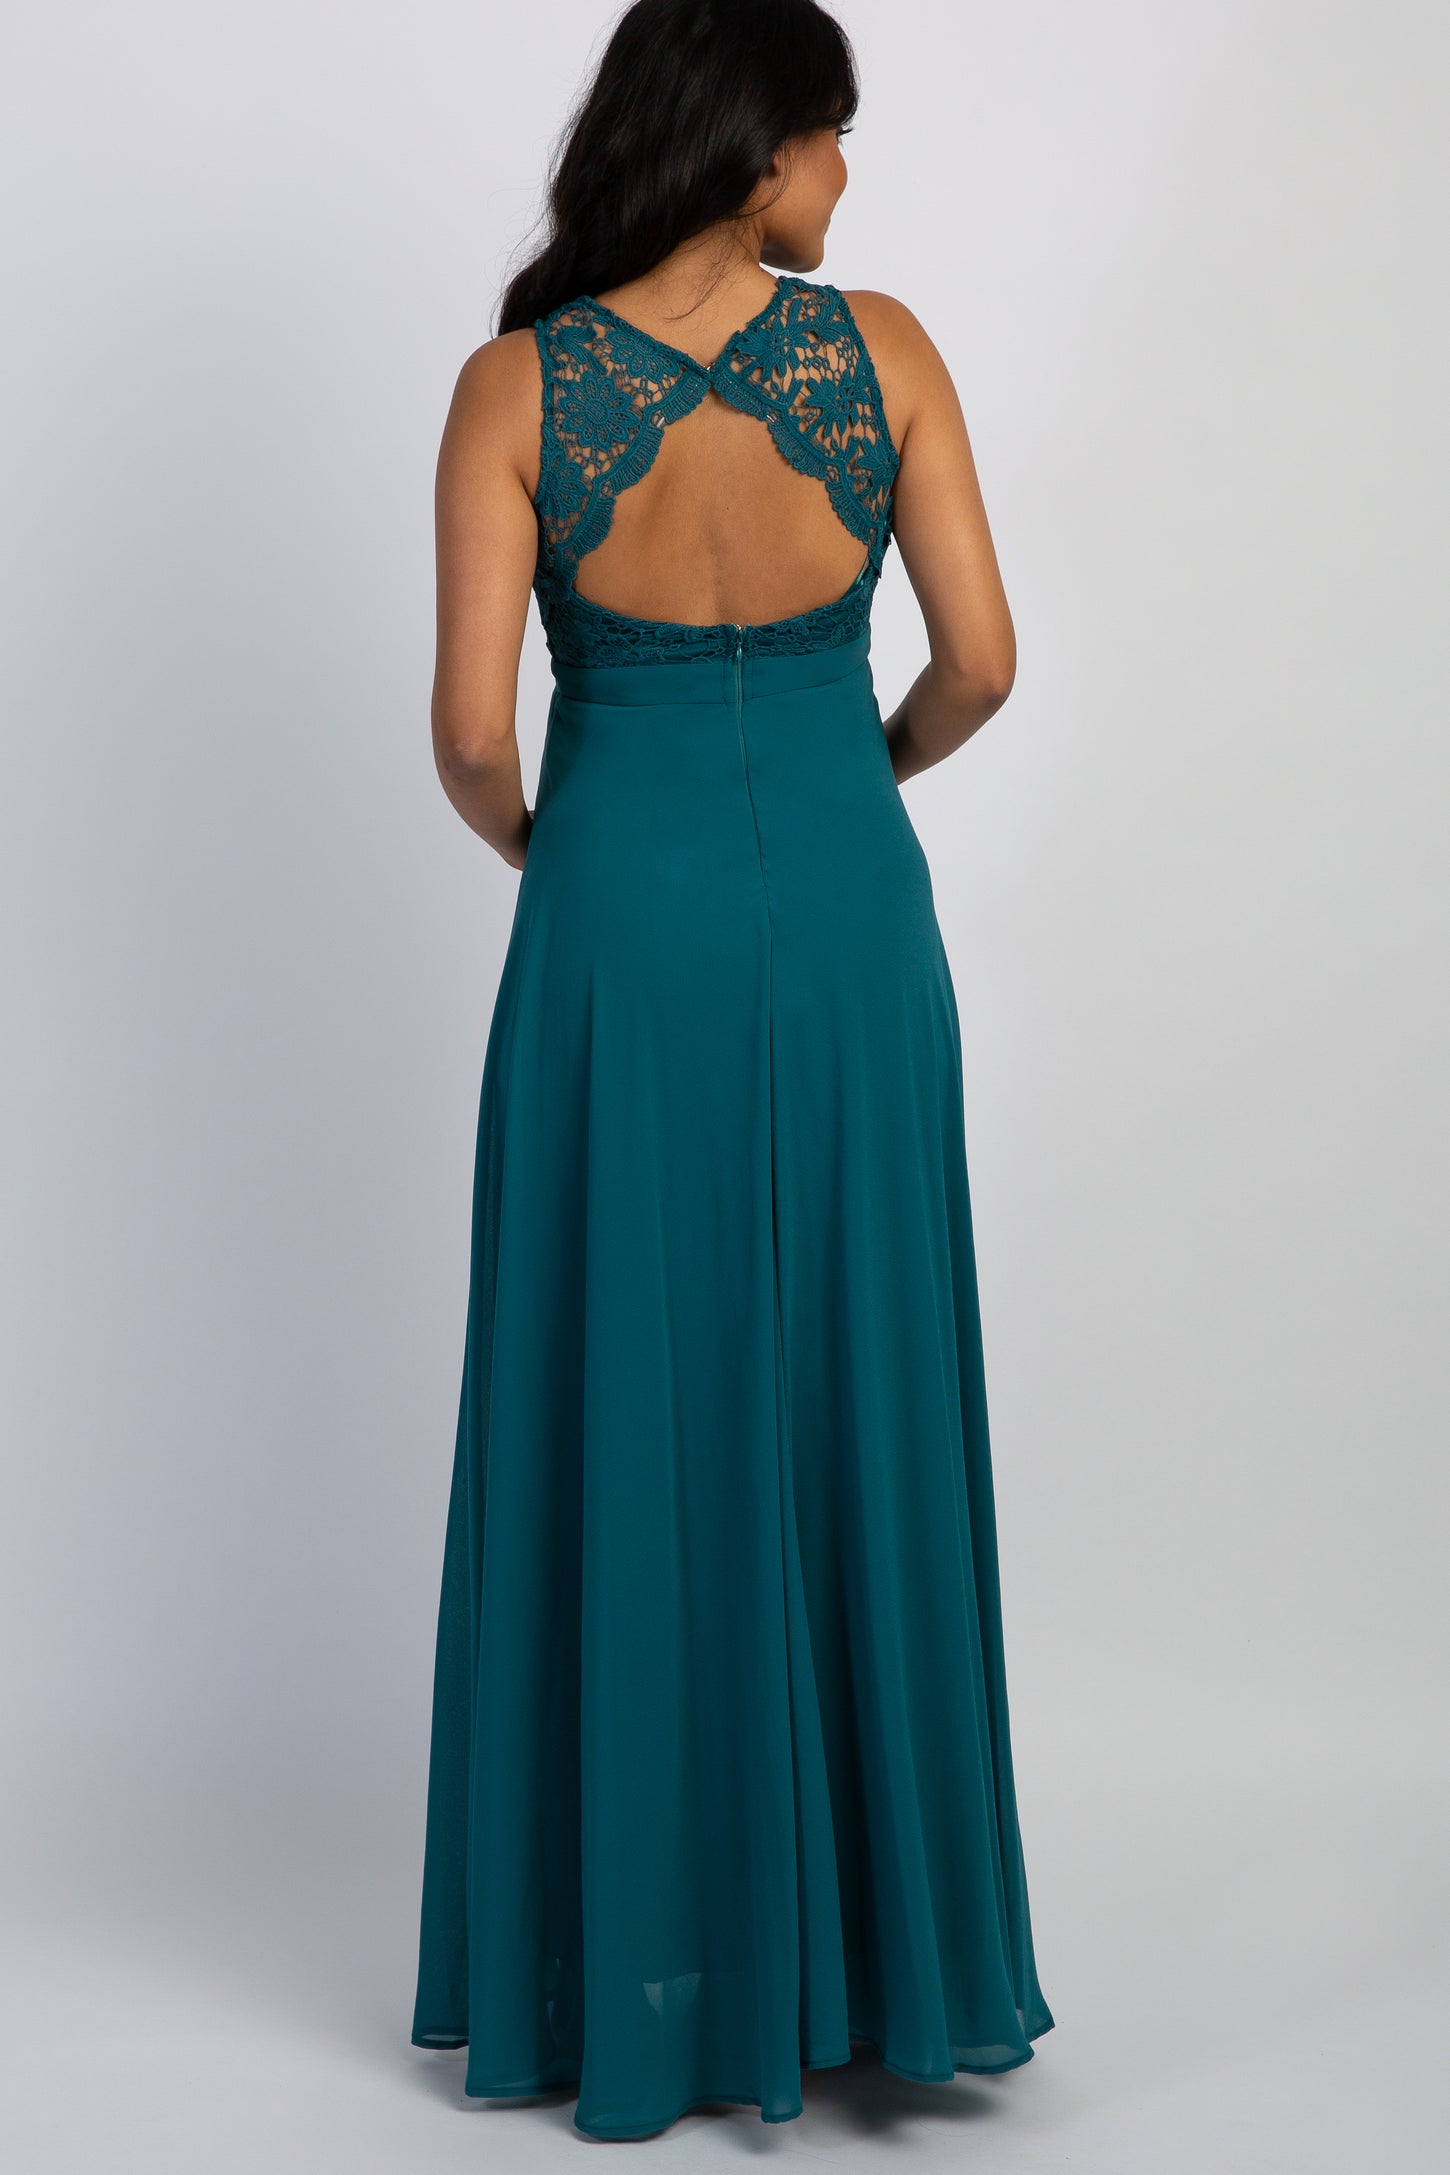 Teal Green Crochet Sweetheart Maternity Evening Gown– PinkBlush